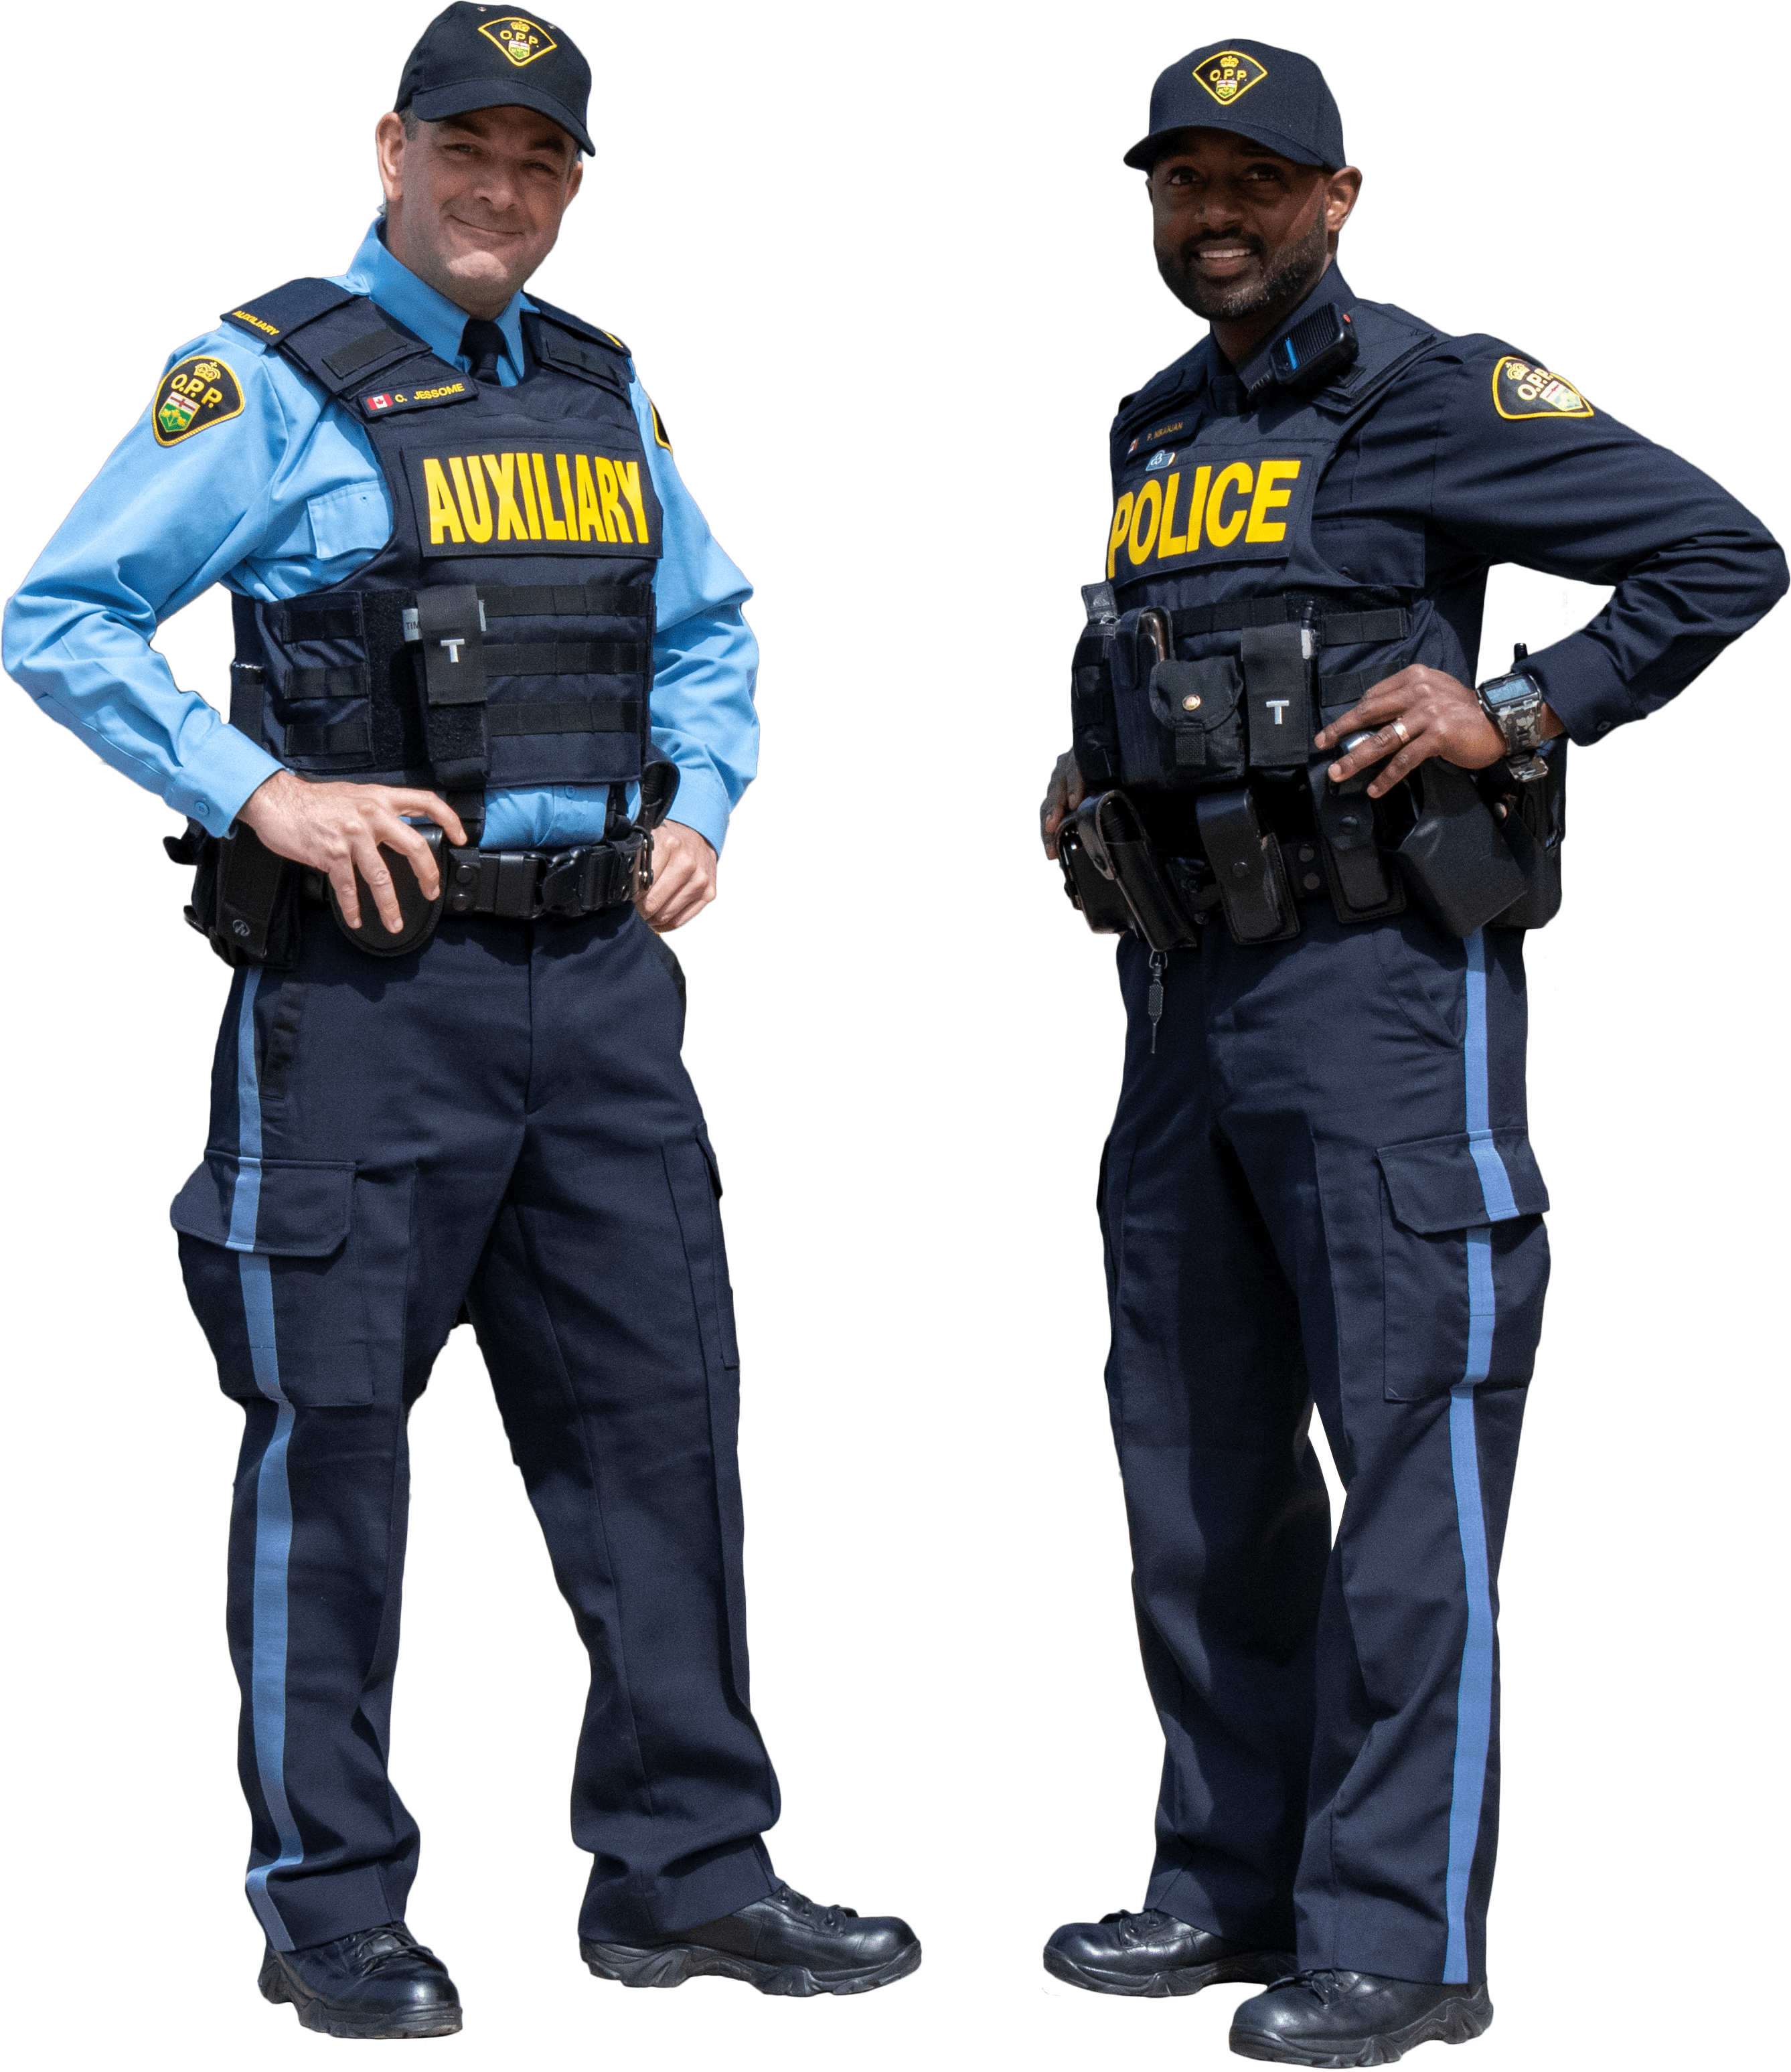 two smiling police officers standing side by side